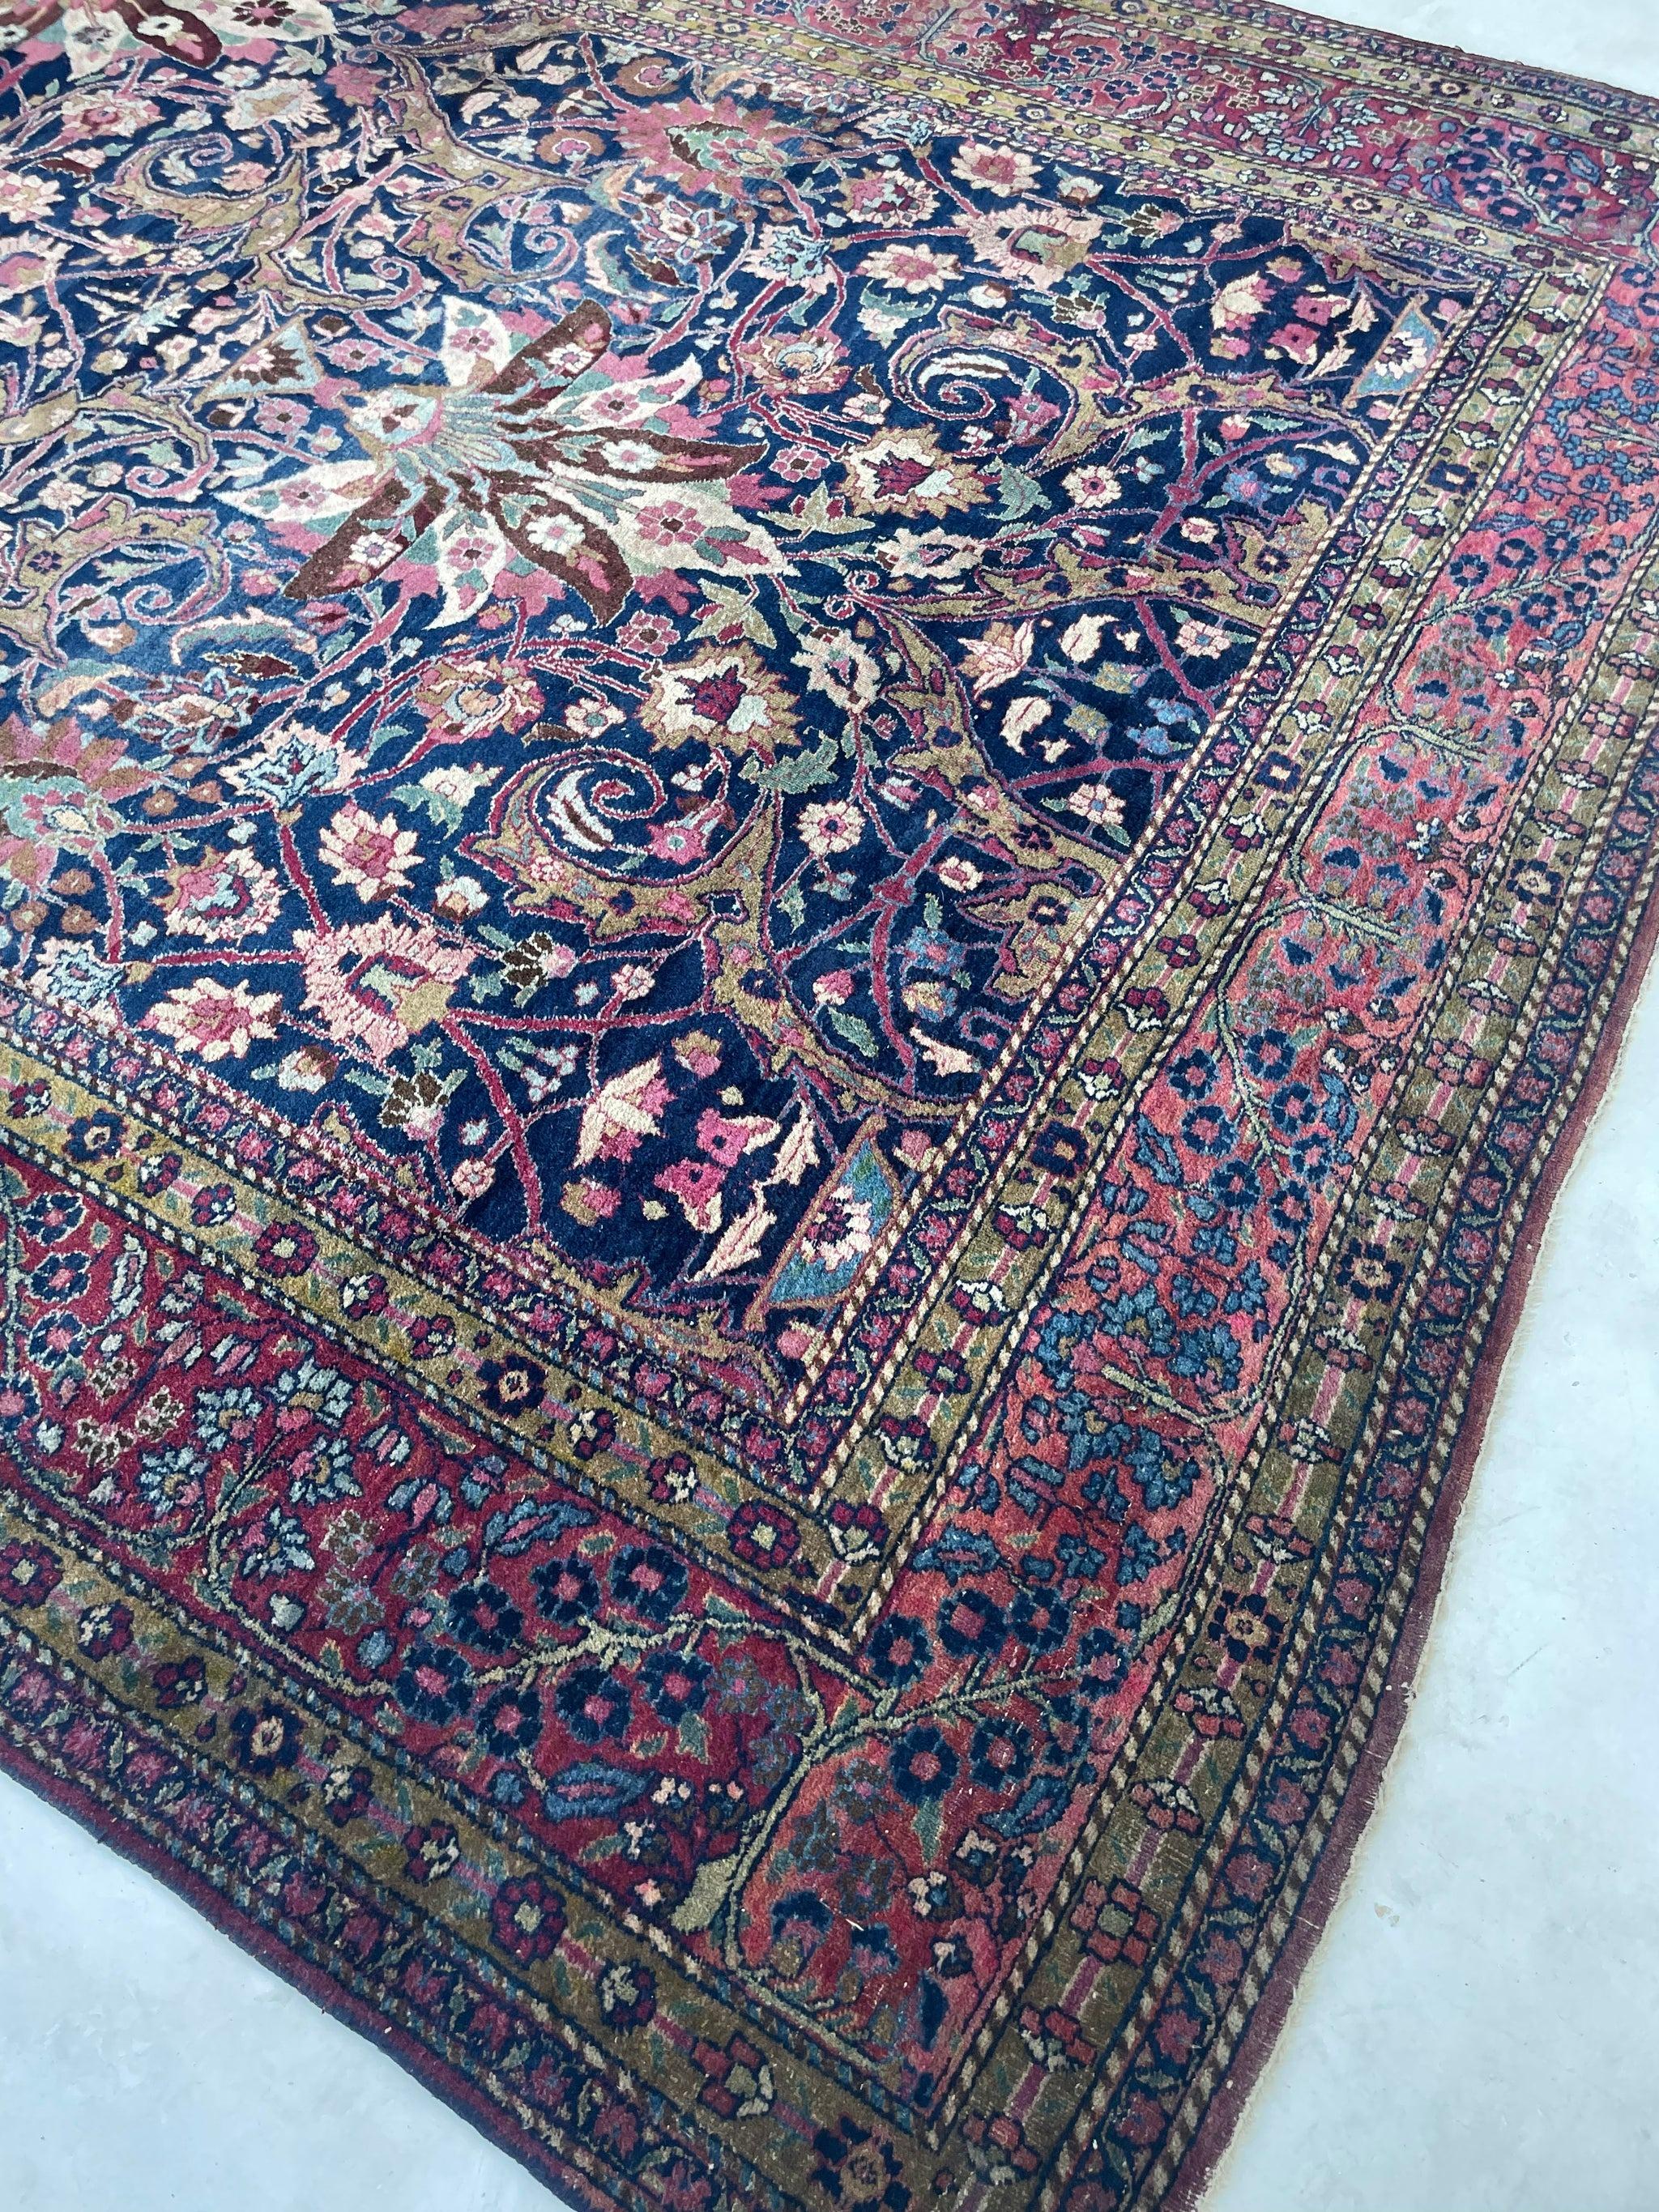 Truly Divine Art Decorative Antique Northeast Khorassan-Mashad 10/10 Piece W/ Gorgeous Palmettes

About: Majestic piece - simply one of the most attractive and decorative antique rugs you will ever see in your life!! The colors are berry, jewel